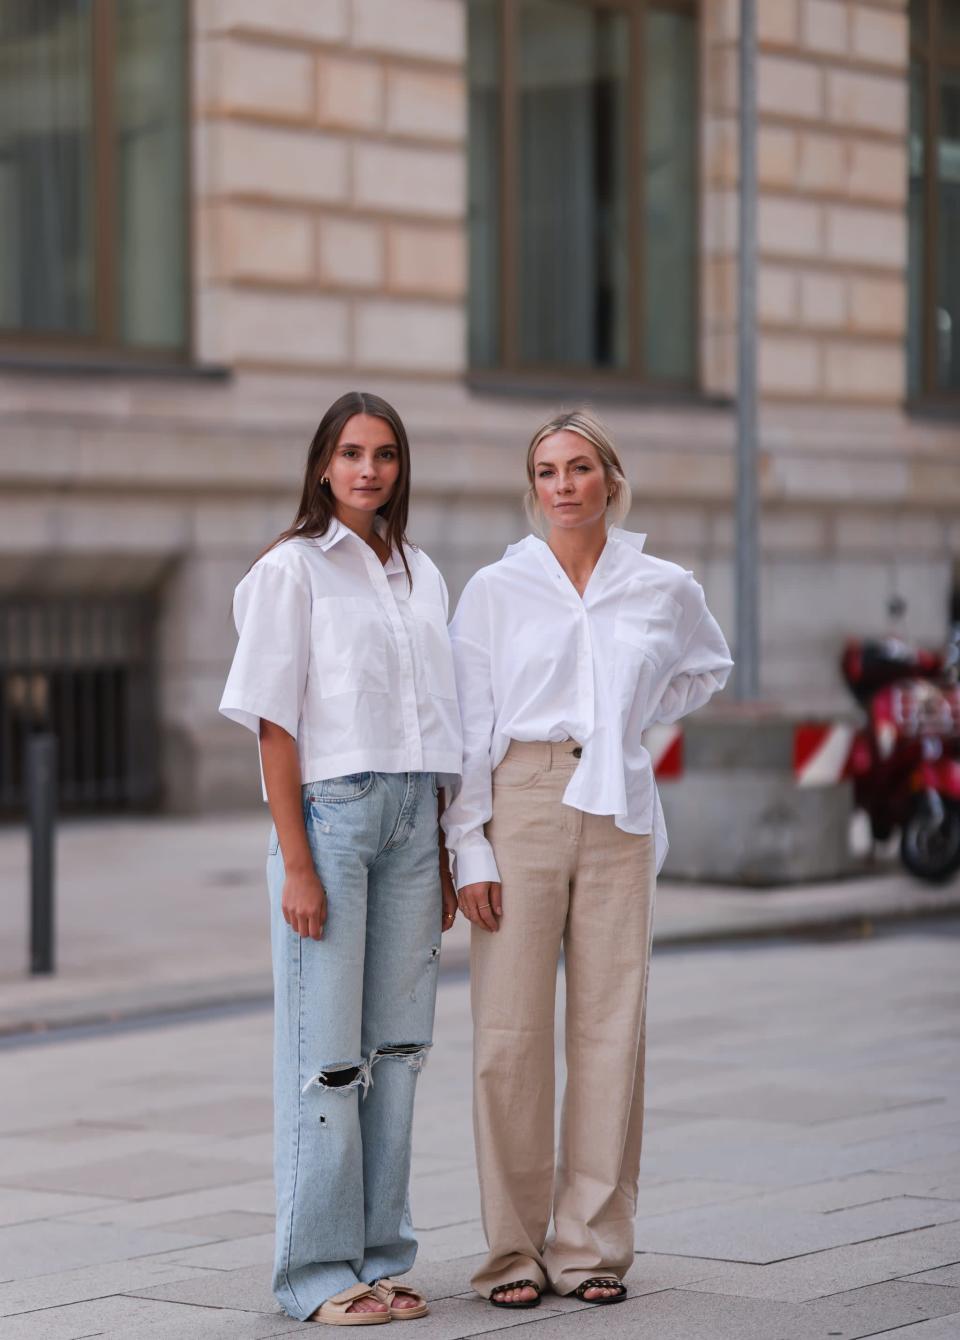 <p>Keep things business-casual in crisp white button-down shirts and comfy slides. Layer on gold bangles or simple necklaces for a little glimmer.</p>